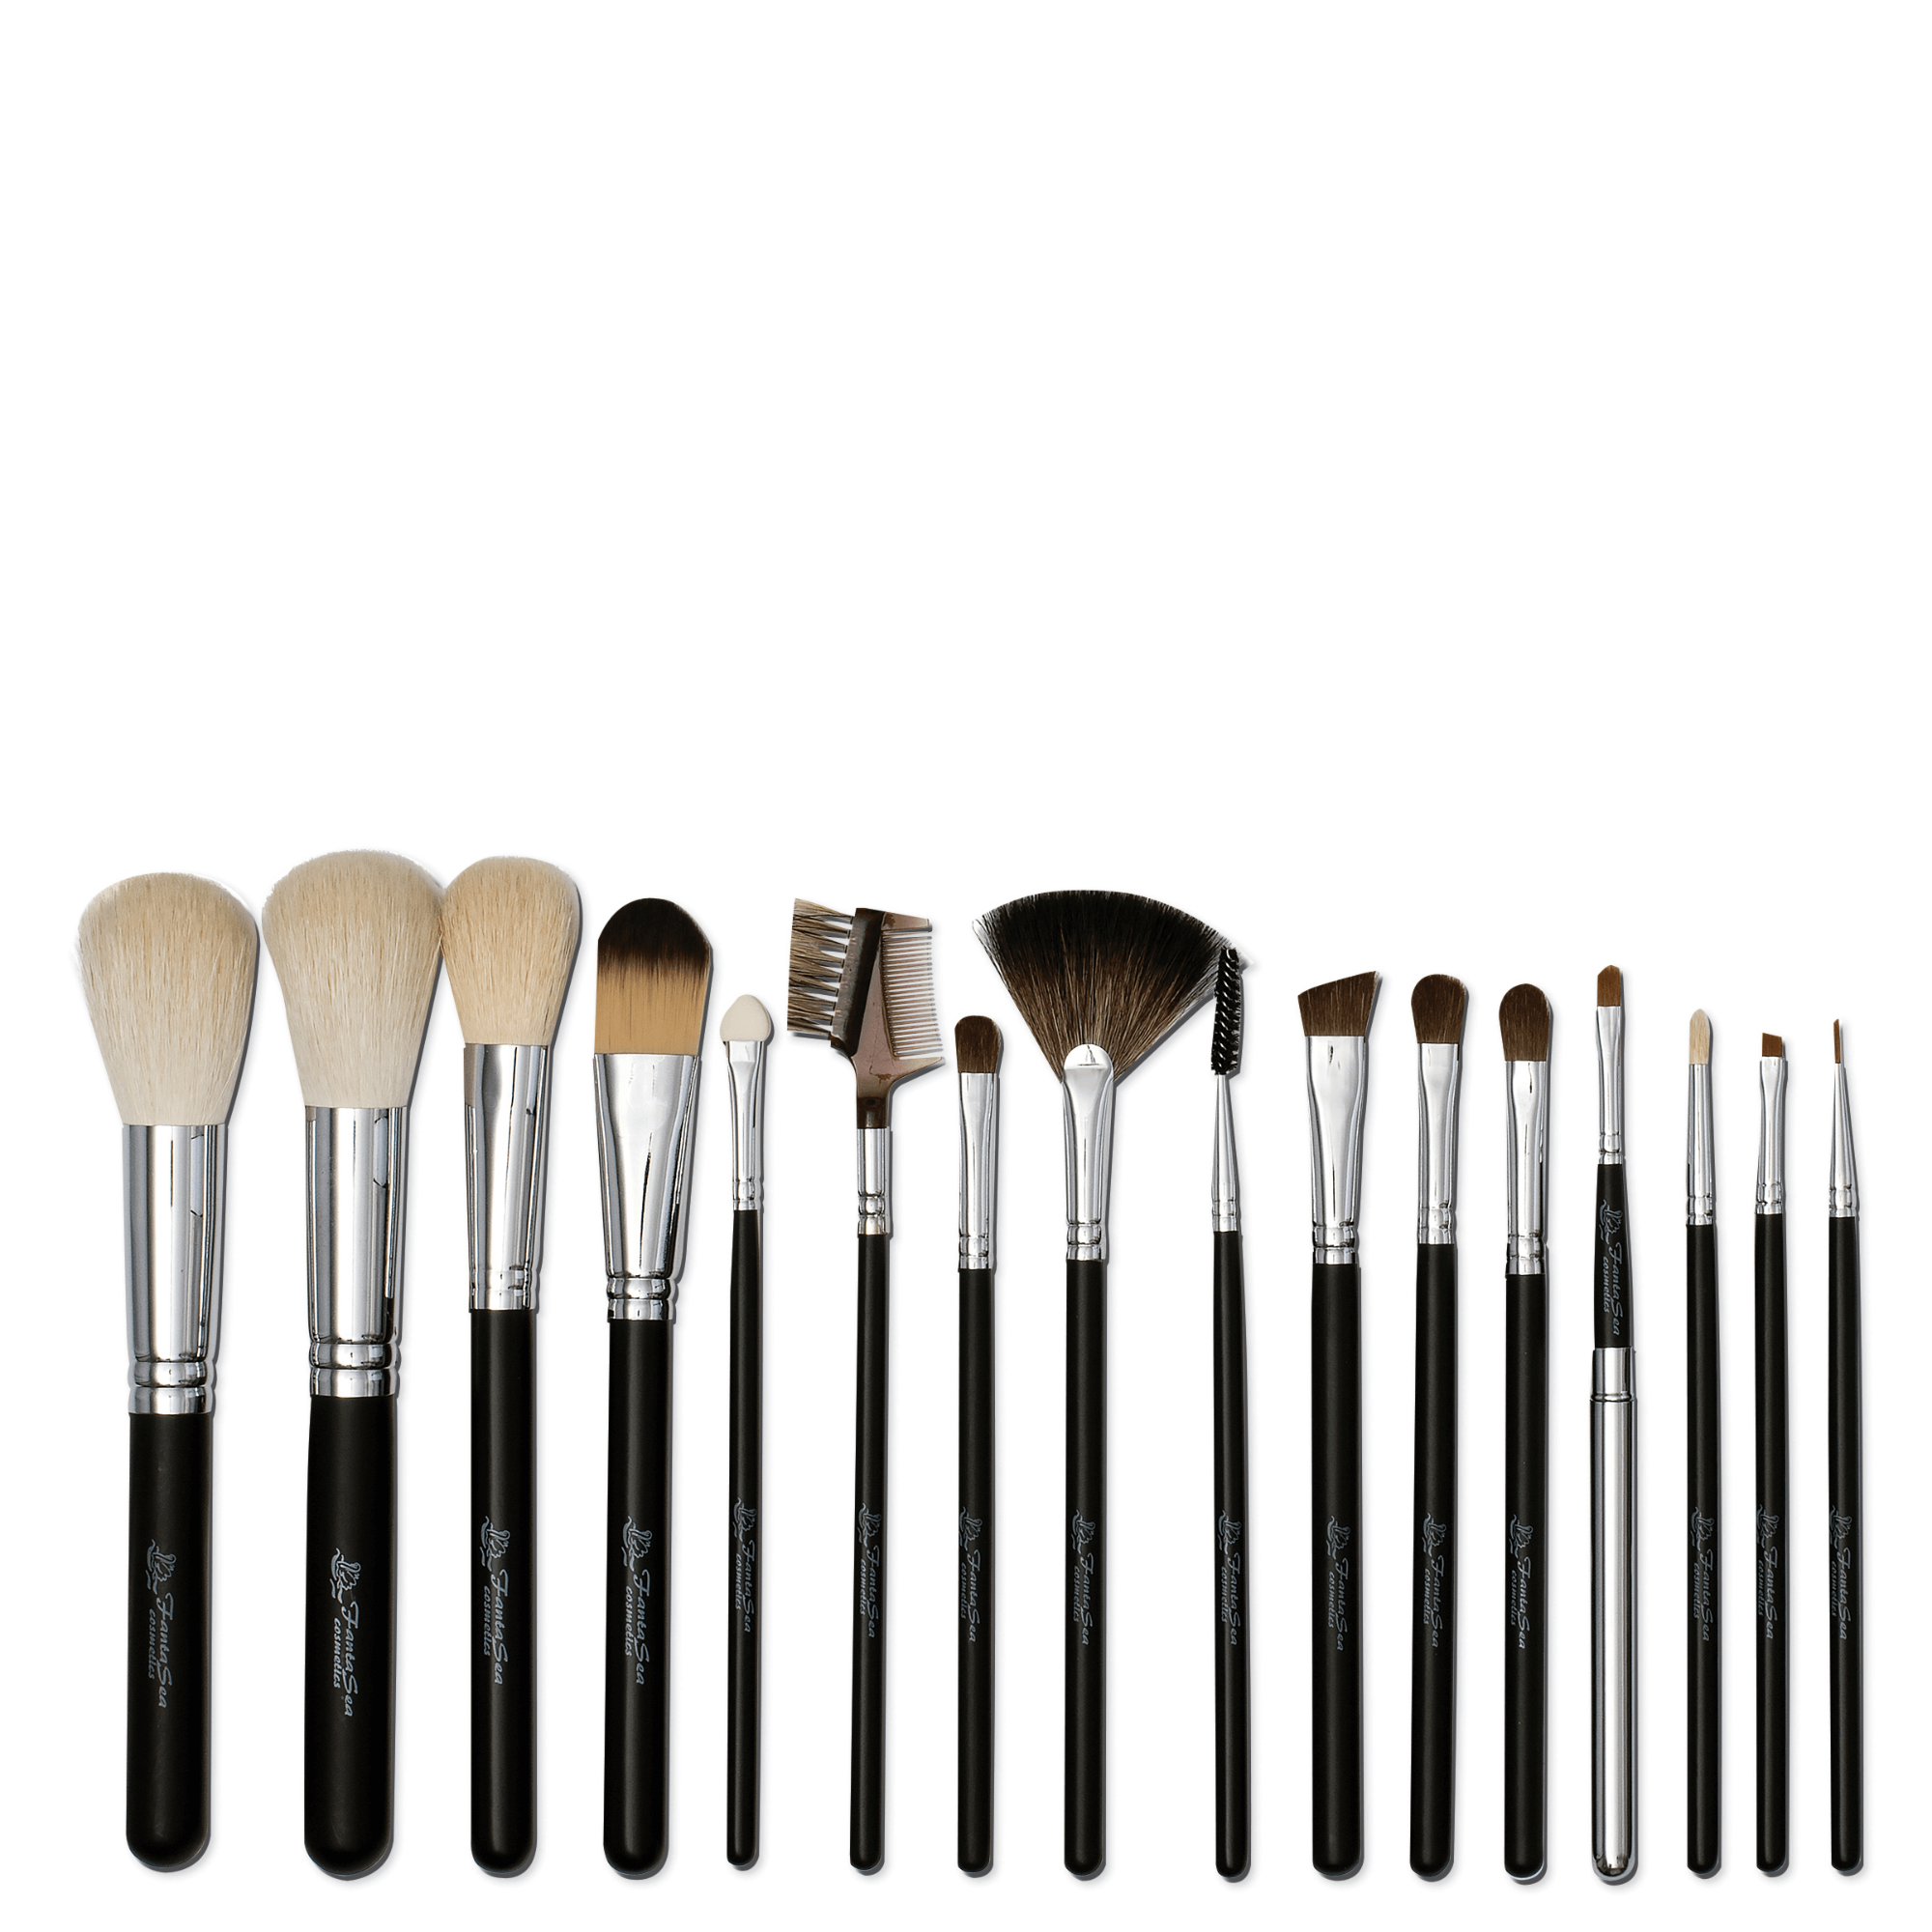 Professional Makeup Brush Set with Case - 16 pc.